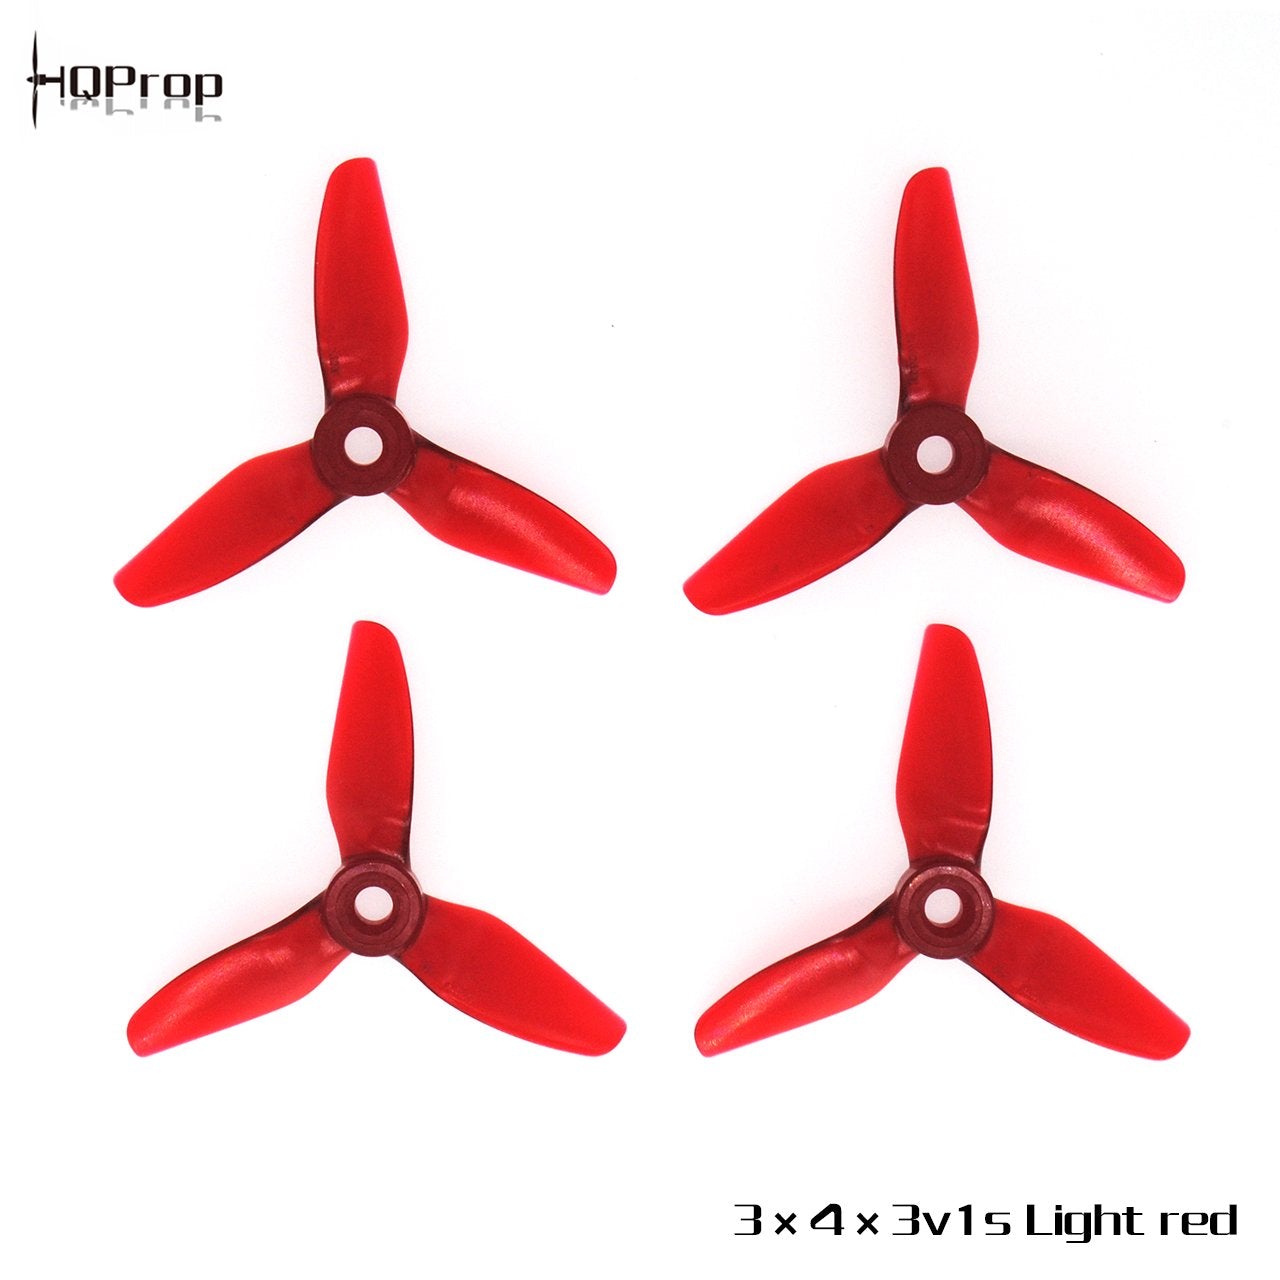 HQProp 3X4X3V1S Tri-Blade 3 inch Propellers 7 - HQProp - Drone Authority